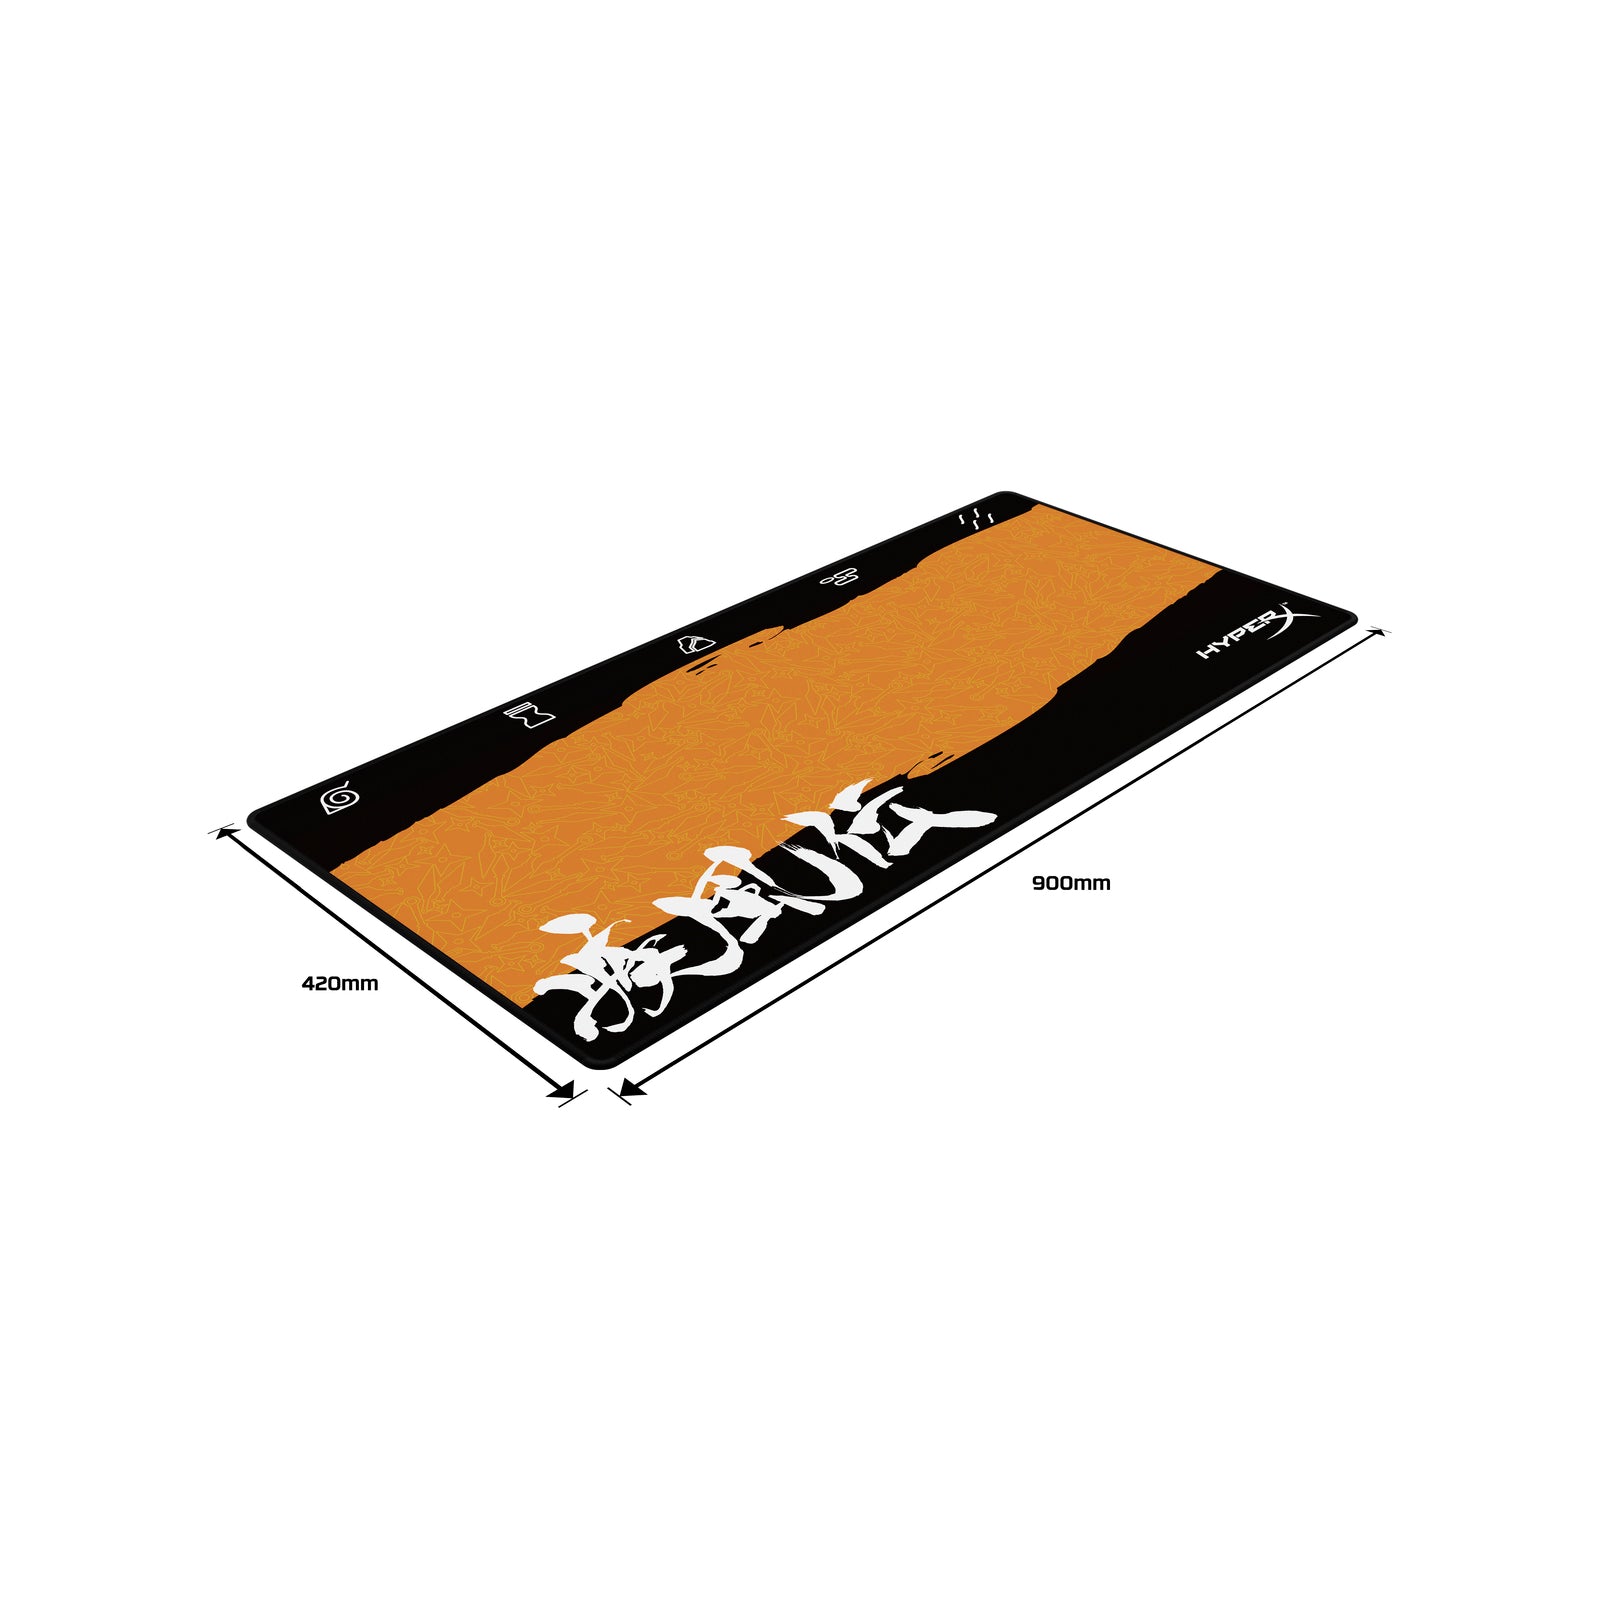 HyperX Pulsefire XL mouse mat Naruto edition left angled view